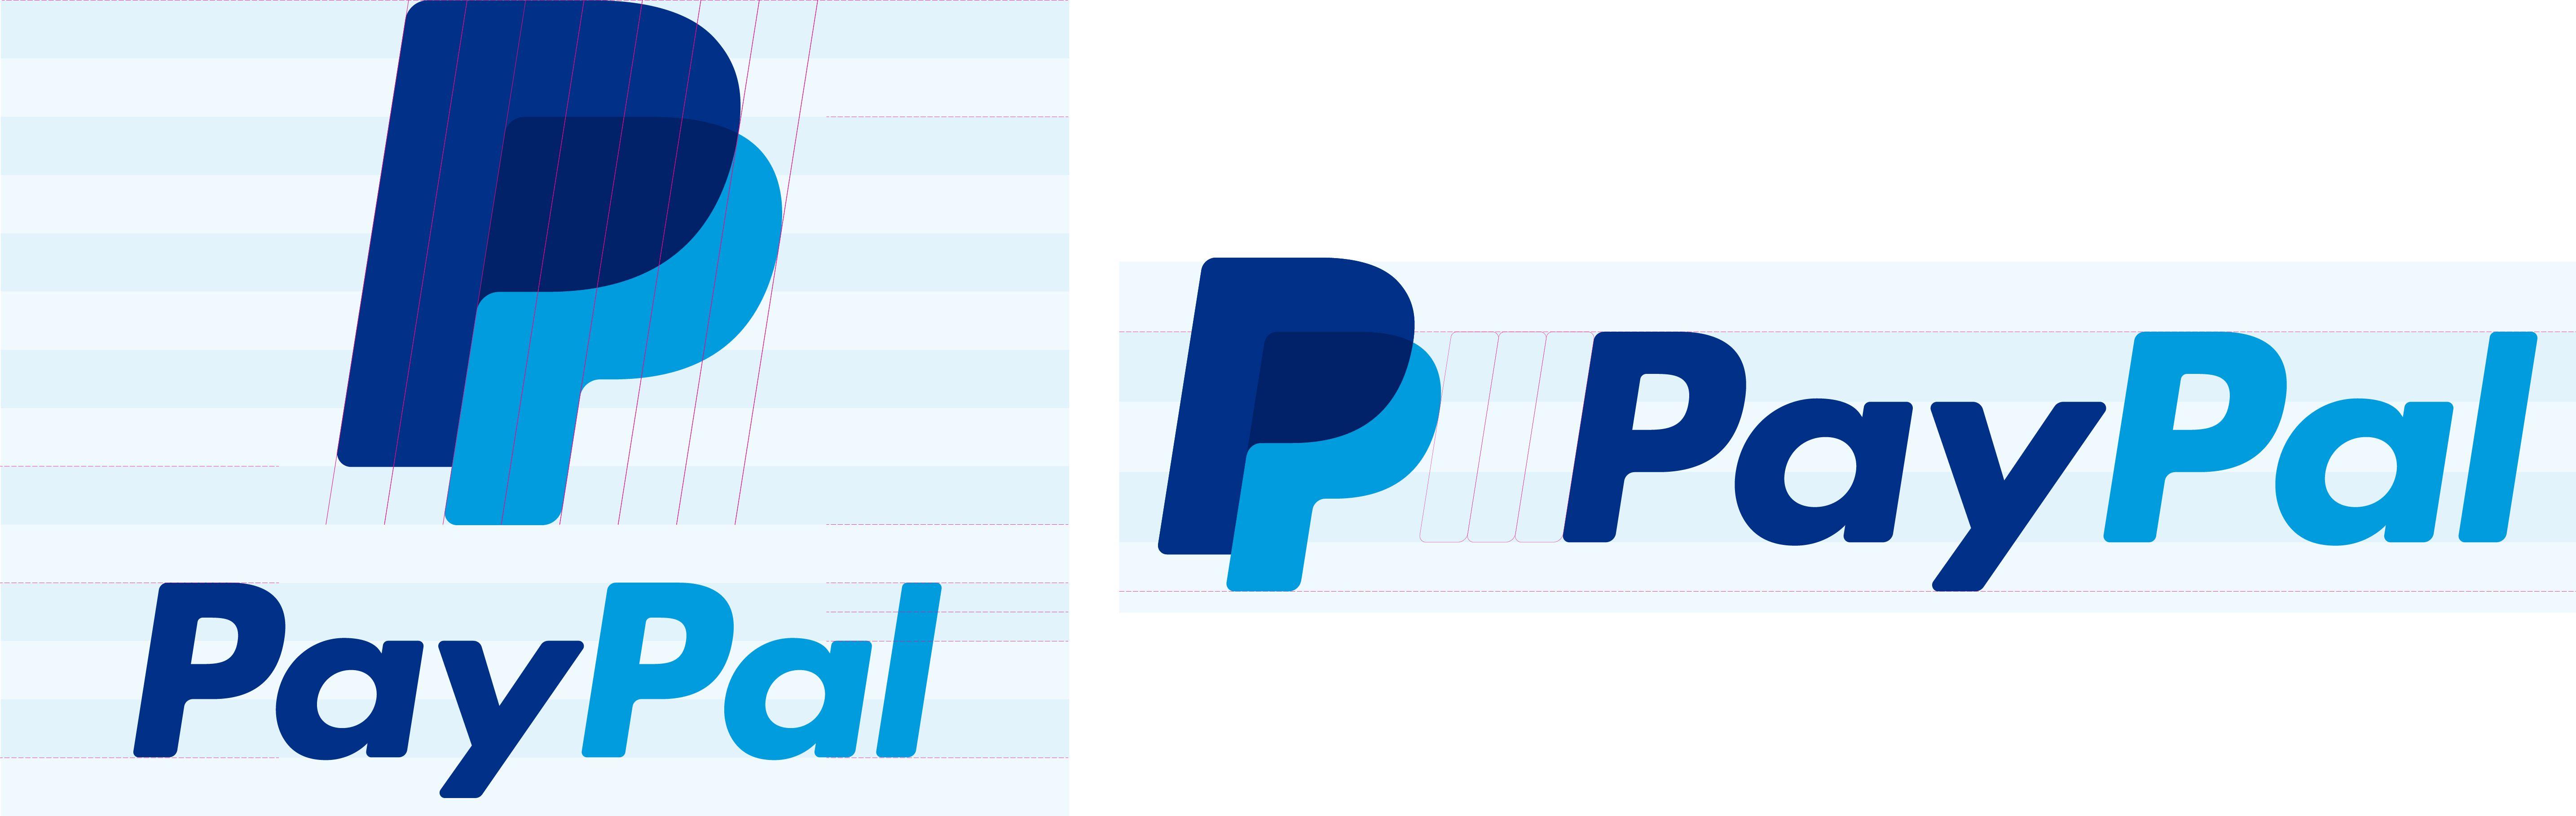 High Resolution PayPal Logo - PayPal launches major brand refresh | Marketing Interactive